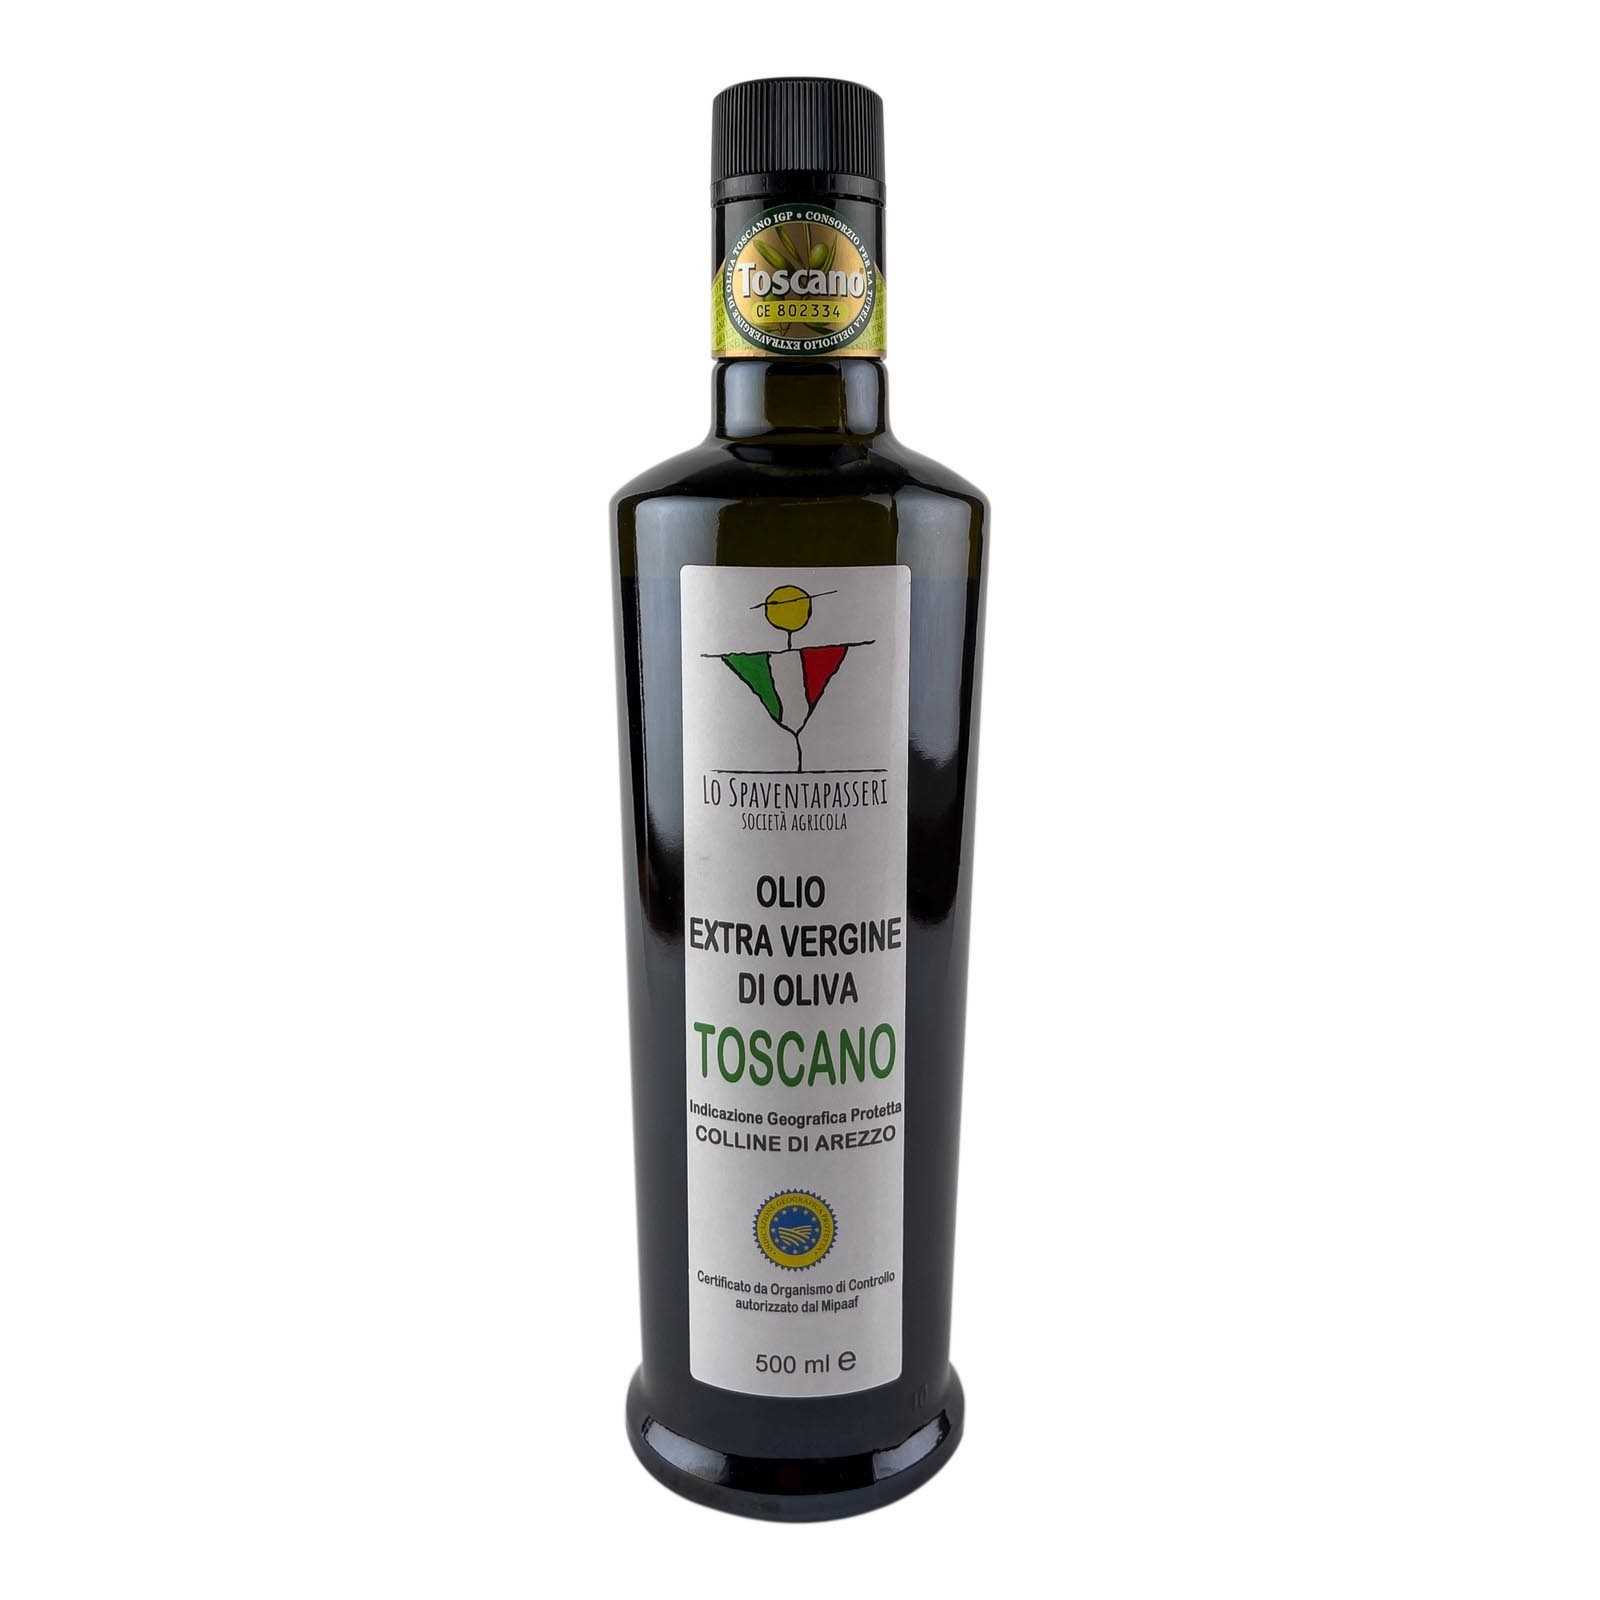 “Lo Spaventapasseri”, tuscan extra virgin olive oil, handcrafted, by cold pressing method, from olives from hills near Arezzo - Year of production 2020/2021.